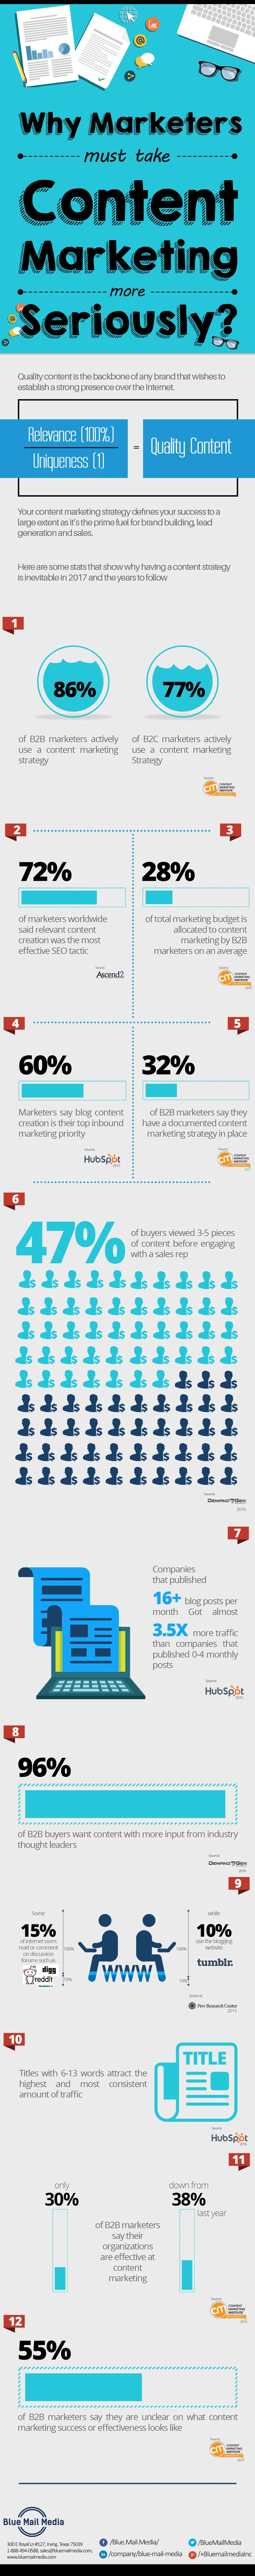 Why Marketers Must Focus on Their Content Strategy - Infographic